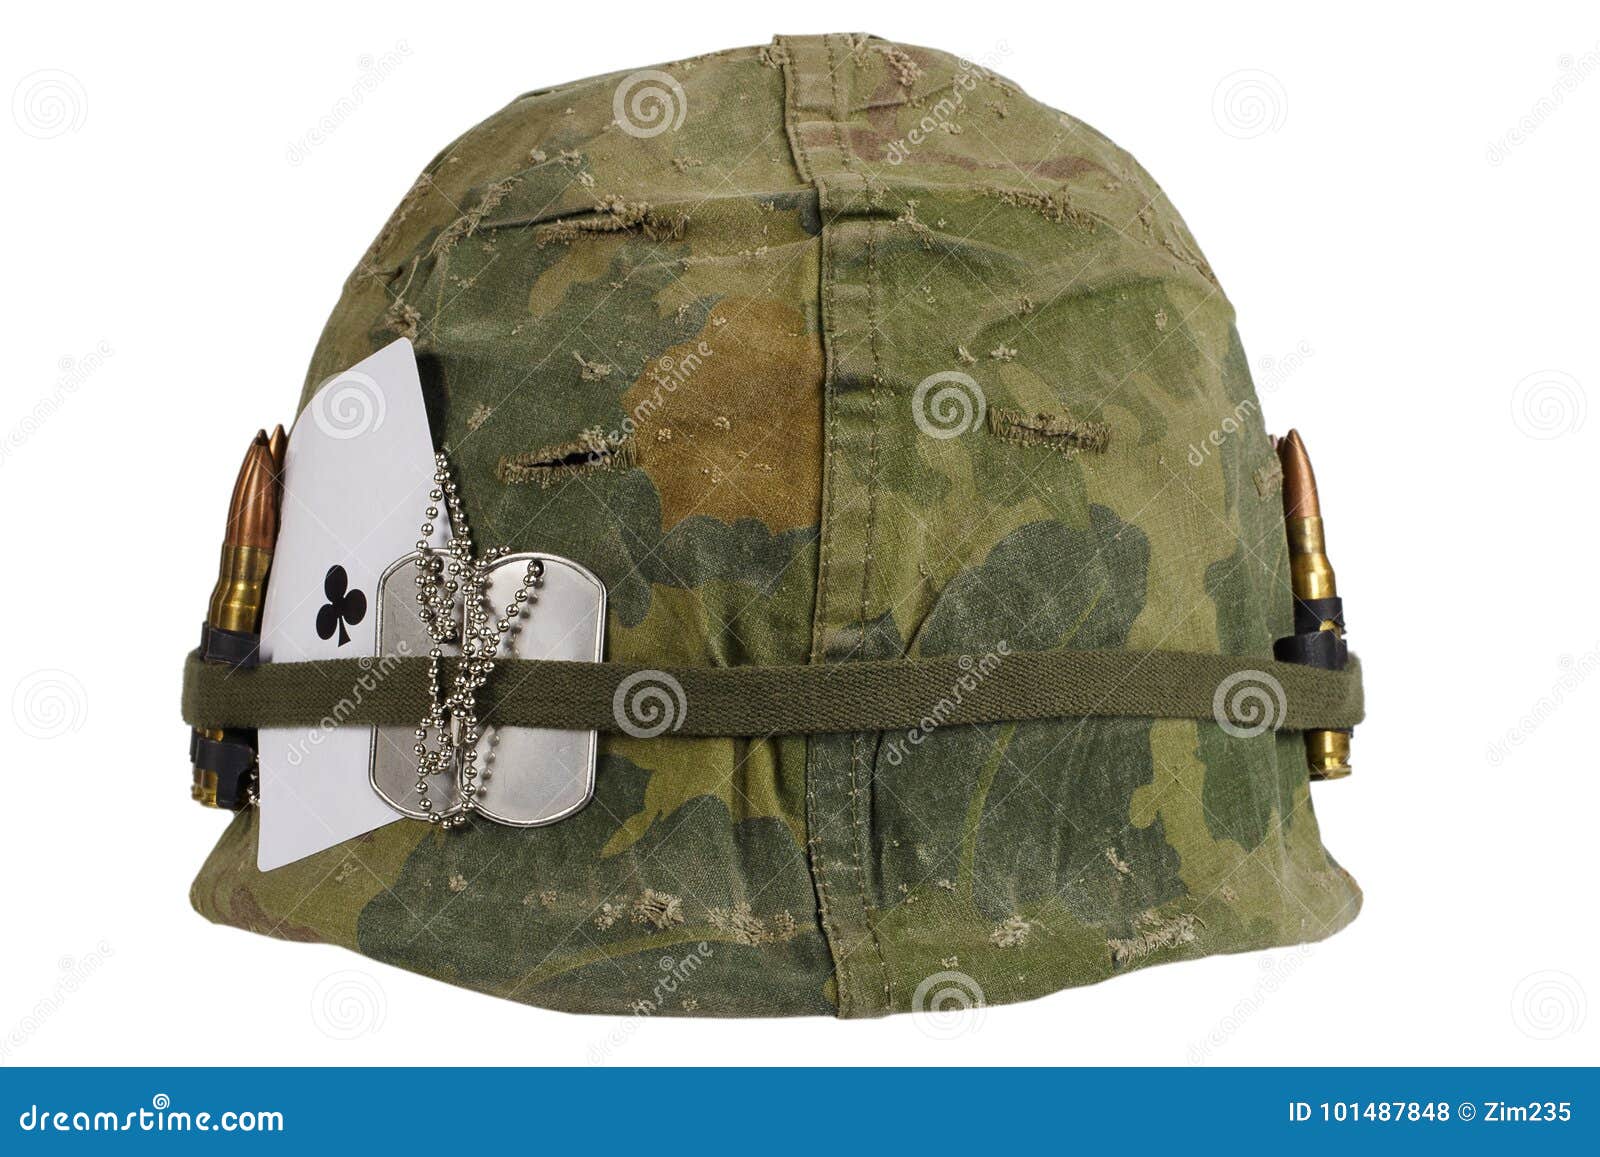 US Army Helmet Vietnam War Period With Camouflage Cover And Ammo Belt